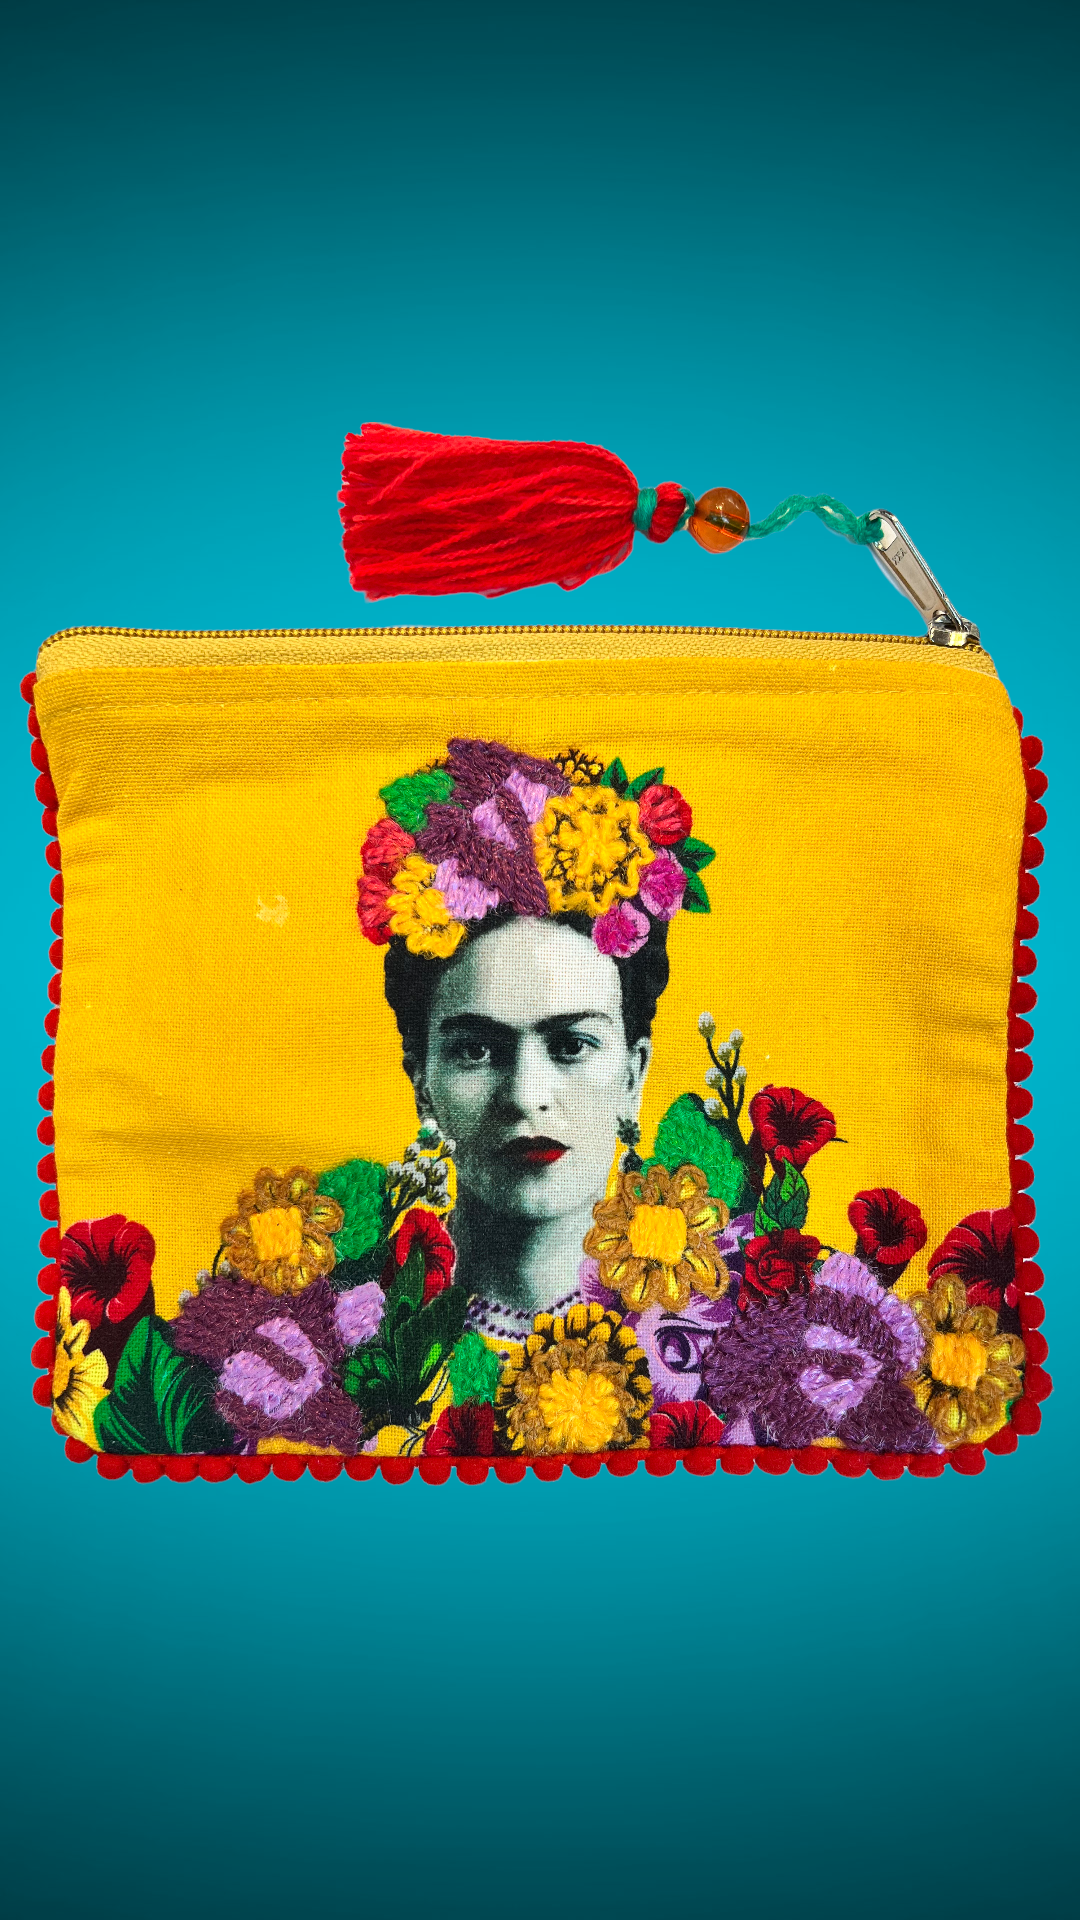 Yellow embroidered purse design with the image of Frida Kahlo in the center with purple and blue flowers. The zipper has a red pom pom as a detail.  